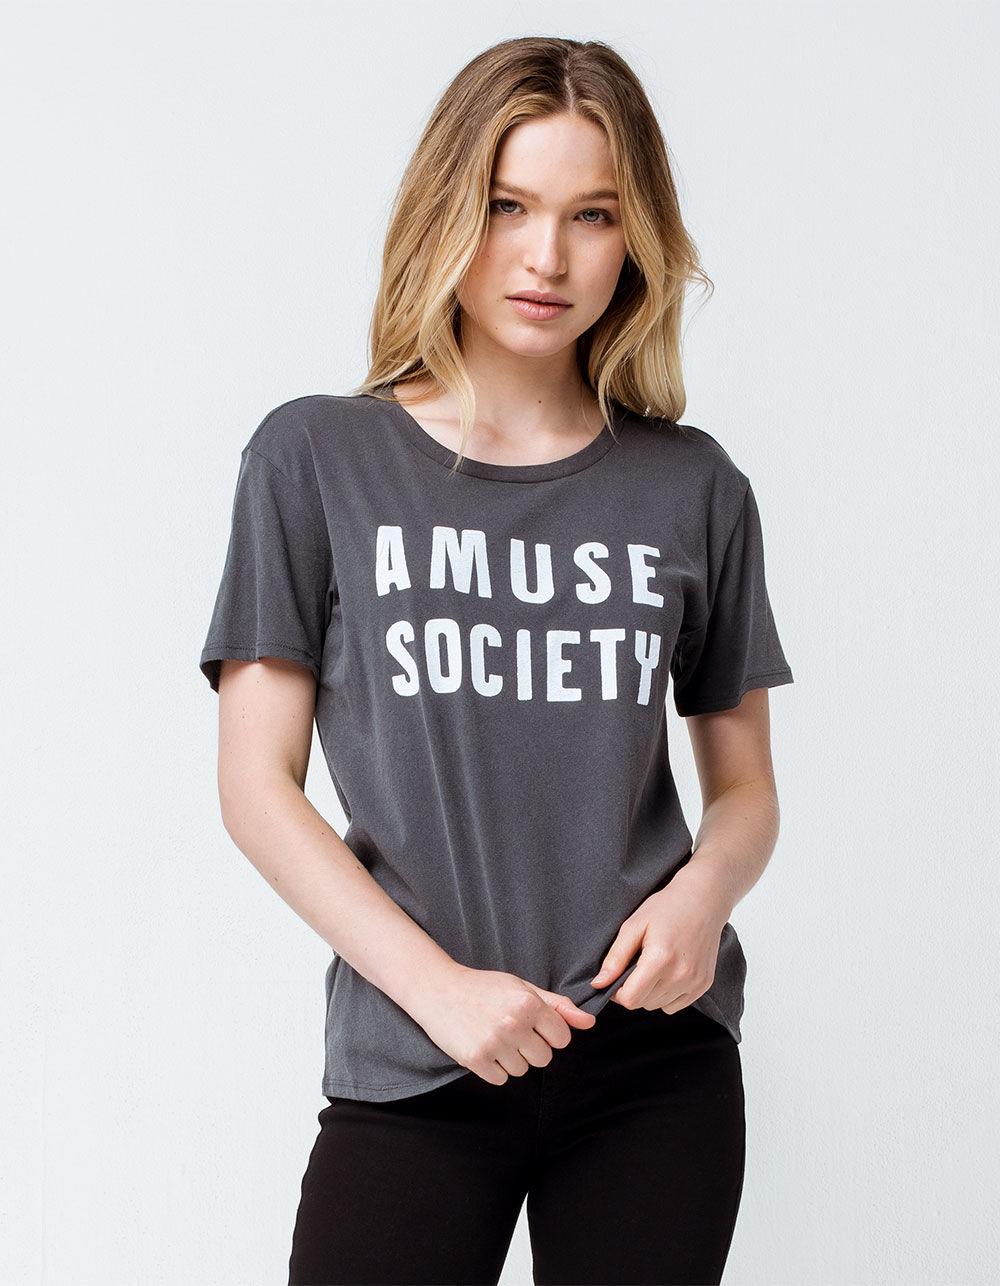 Lyst - Amuse Society Womens Tee in Gray